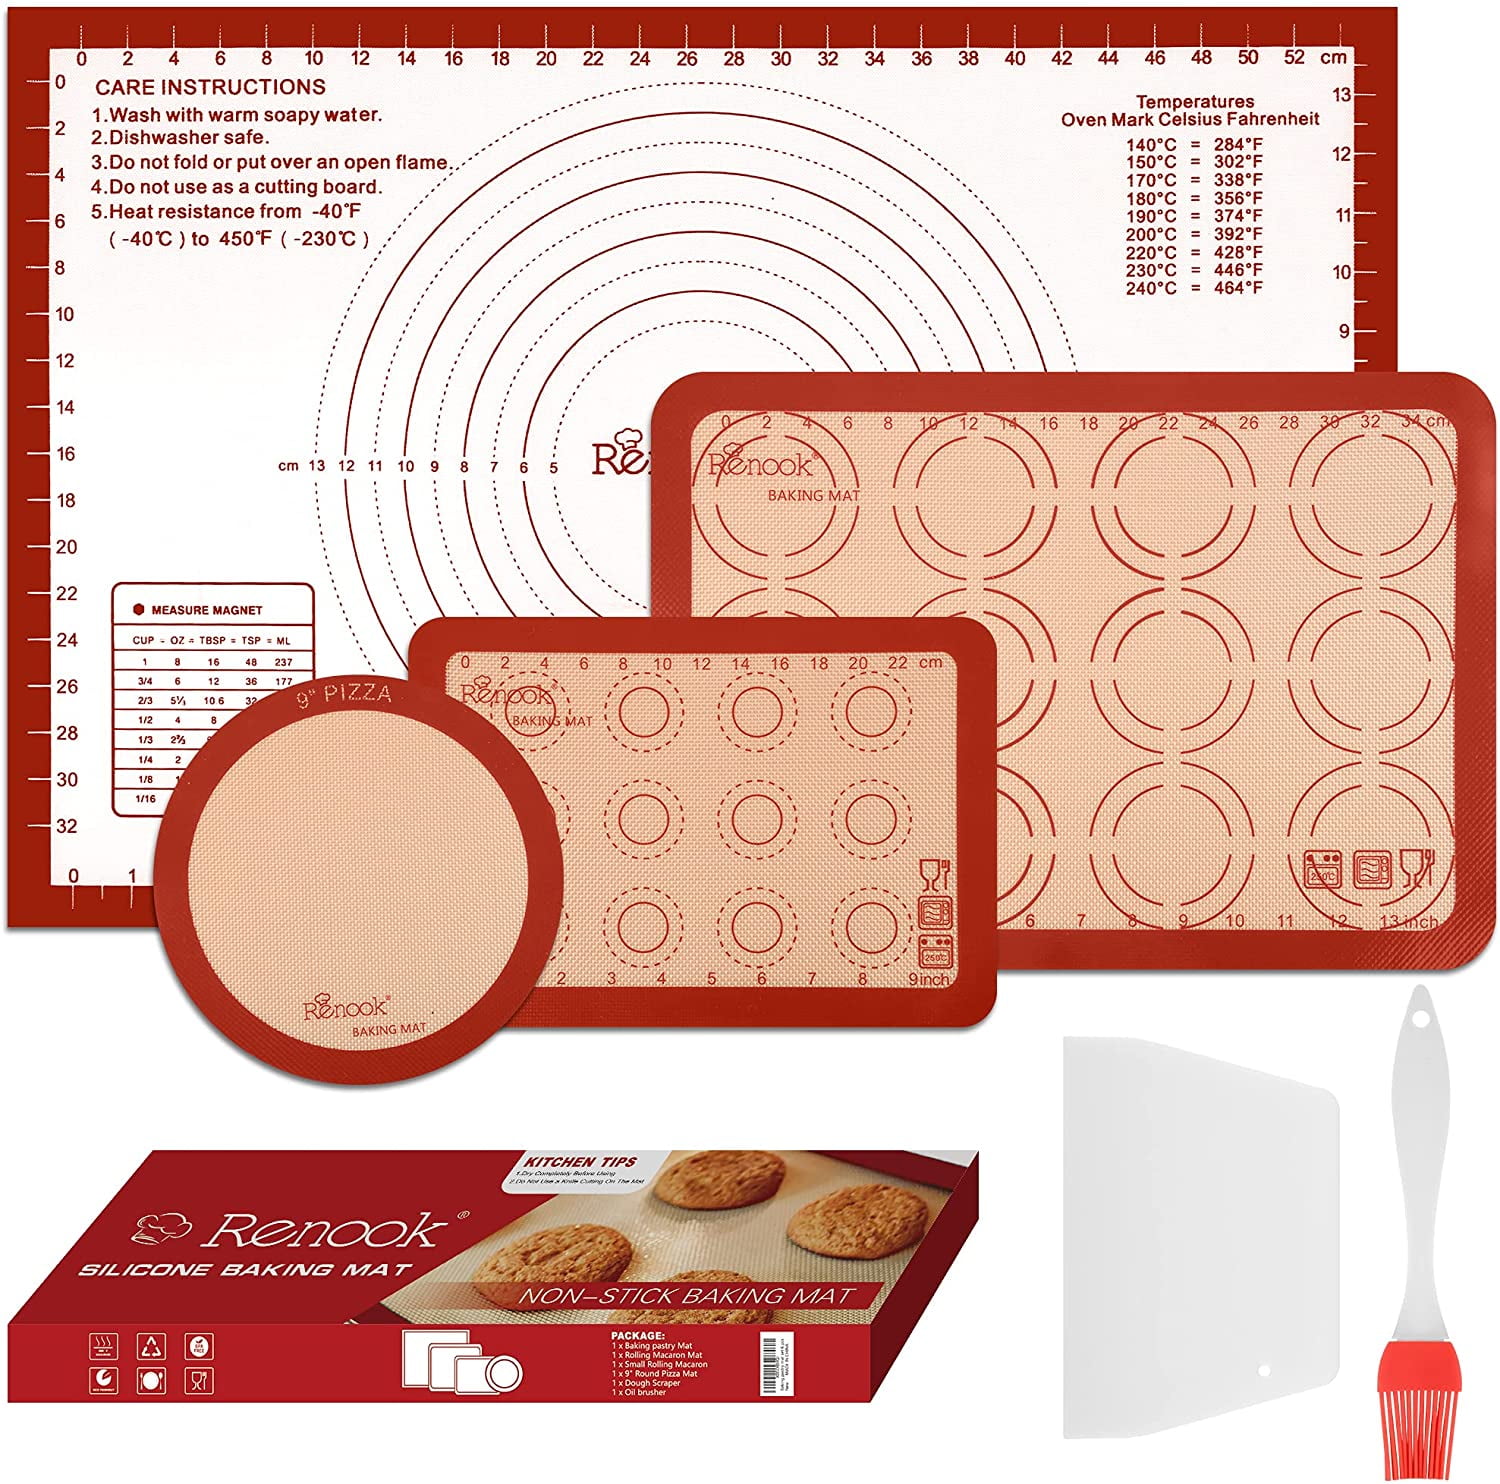 Set of 2 Half Sheet Silicone Baking Mat - Non Stick Silicon Liner for Bake Pans & Rolling Macaron/Pastry/Cookie/Bun/Bread Making Professional Grade Nonstick Thick & Large 11 5/8 x 16 1/2 